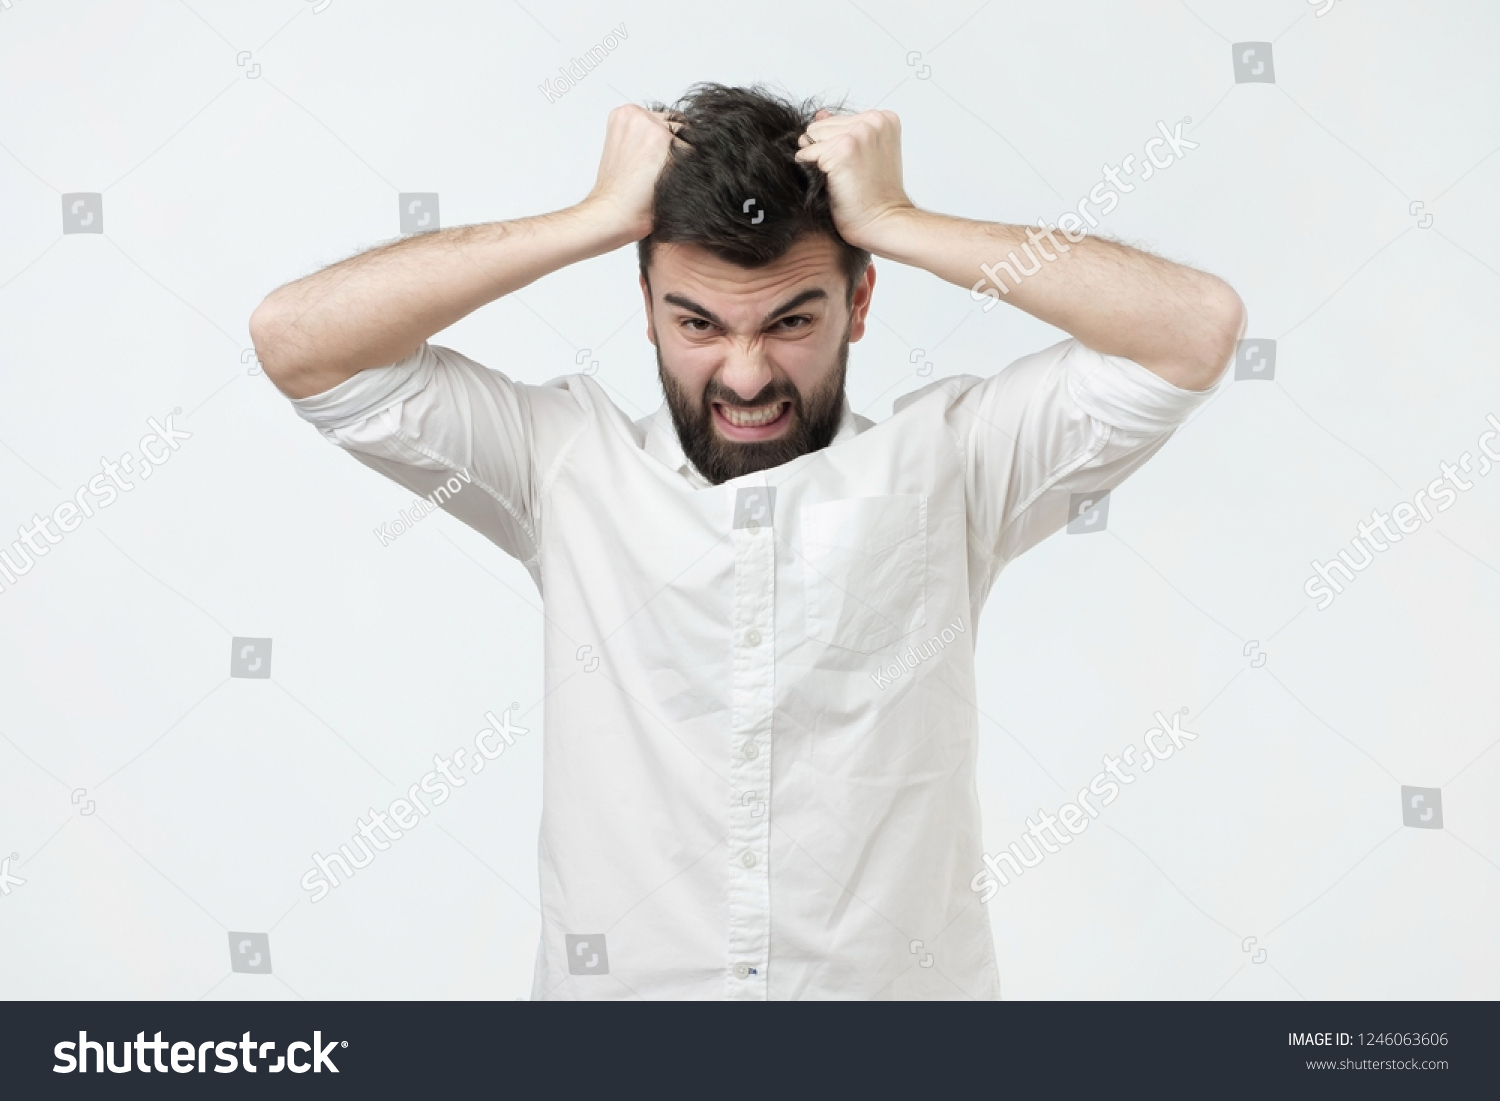 Angry and furious man on a gray background. He pulls out his hair in a rage #1246063606